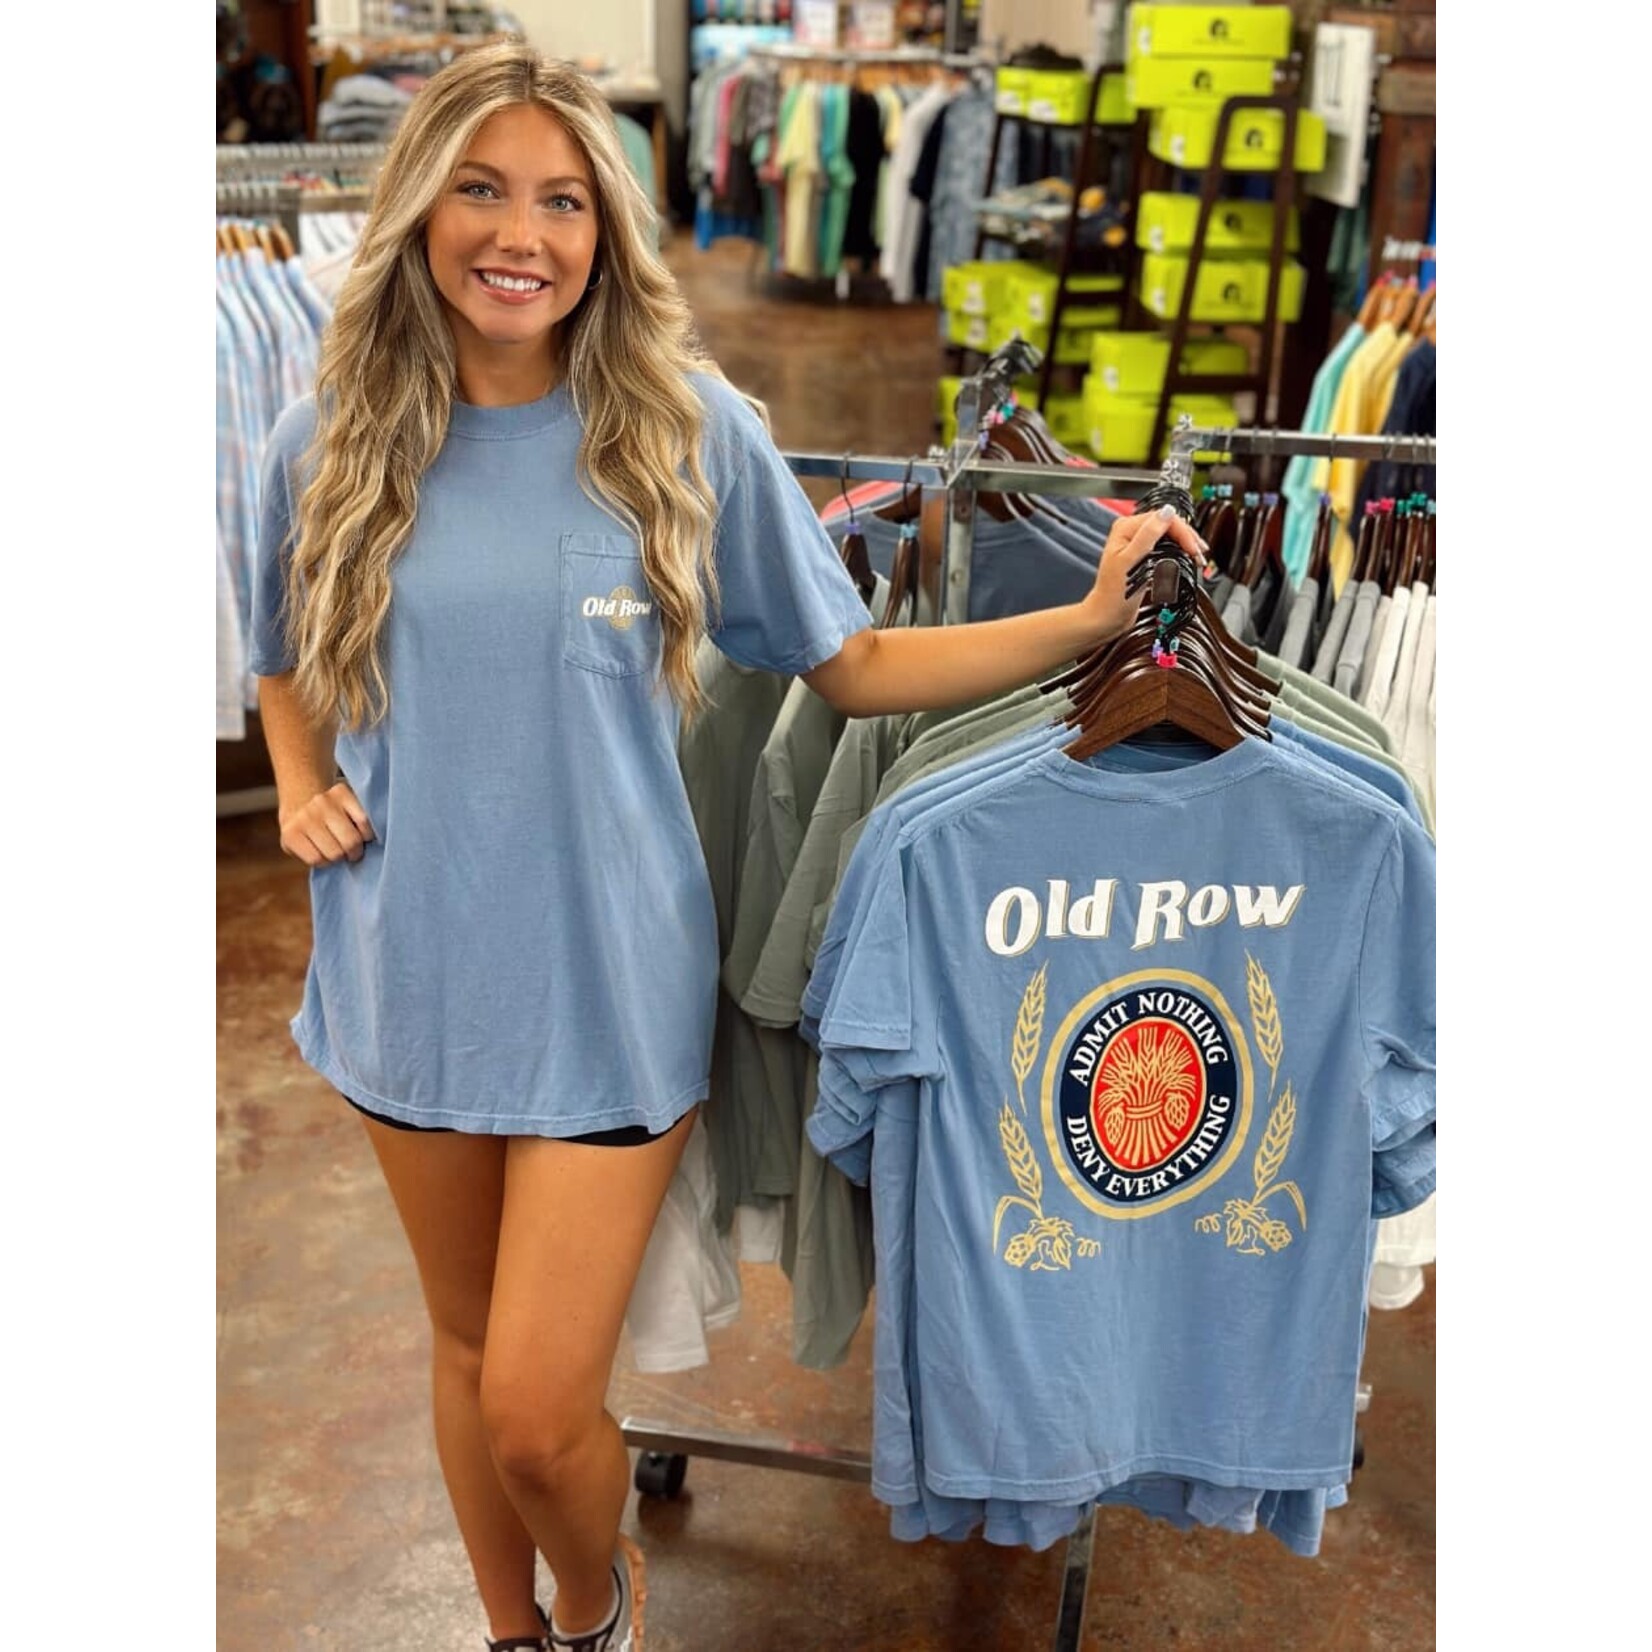 OLD ROW Old Row Outdoors Retro Can Pocket S/S TEE Shirt